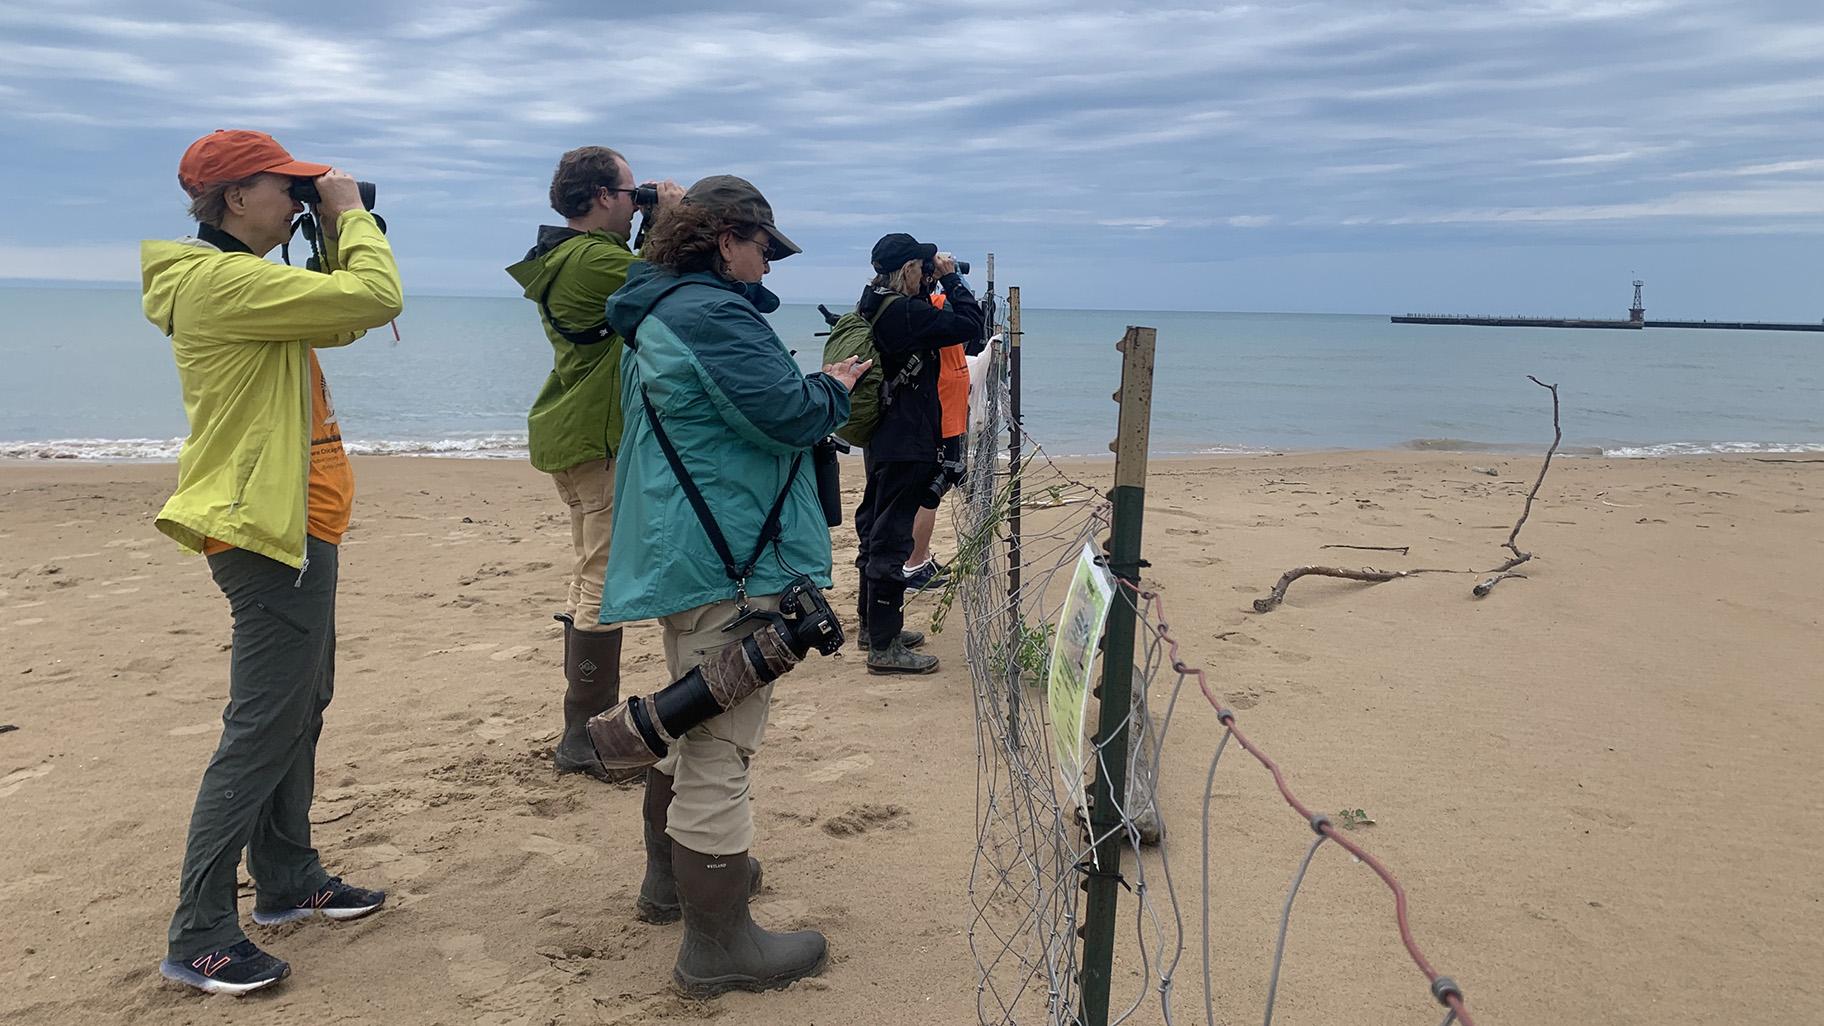 Birding enthusiasts and volunteers with the Chicago Piping Plovers group gather to monitor piping plovers at Montrose Beach following the release of three plovers, of whom include Searocket, on July 12, 2023. (Eunice Alpasan / WTTW News)